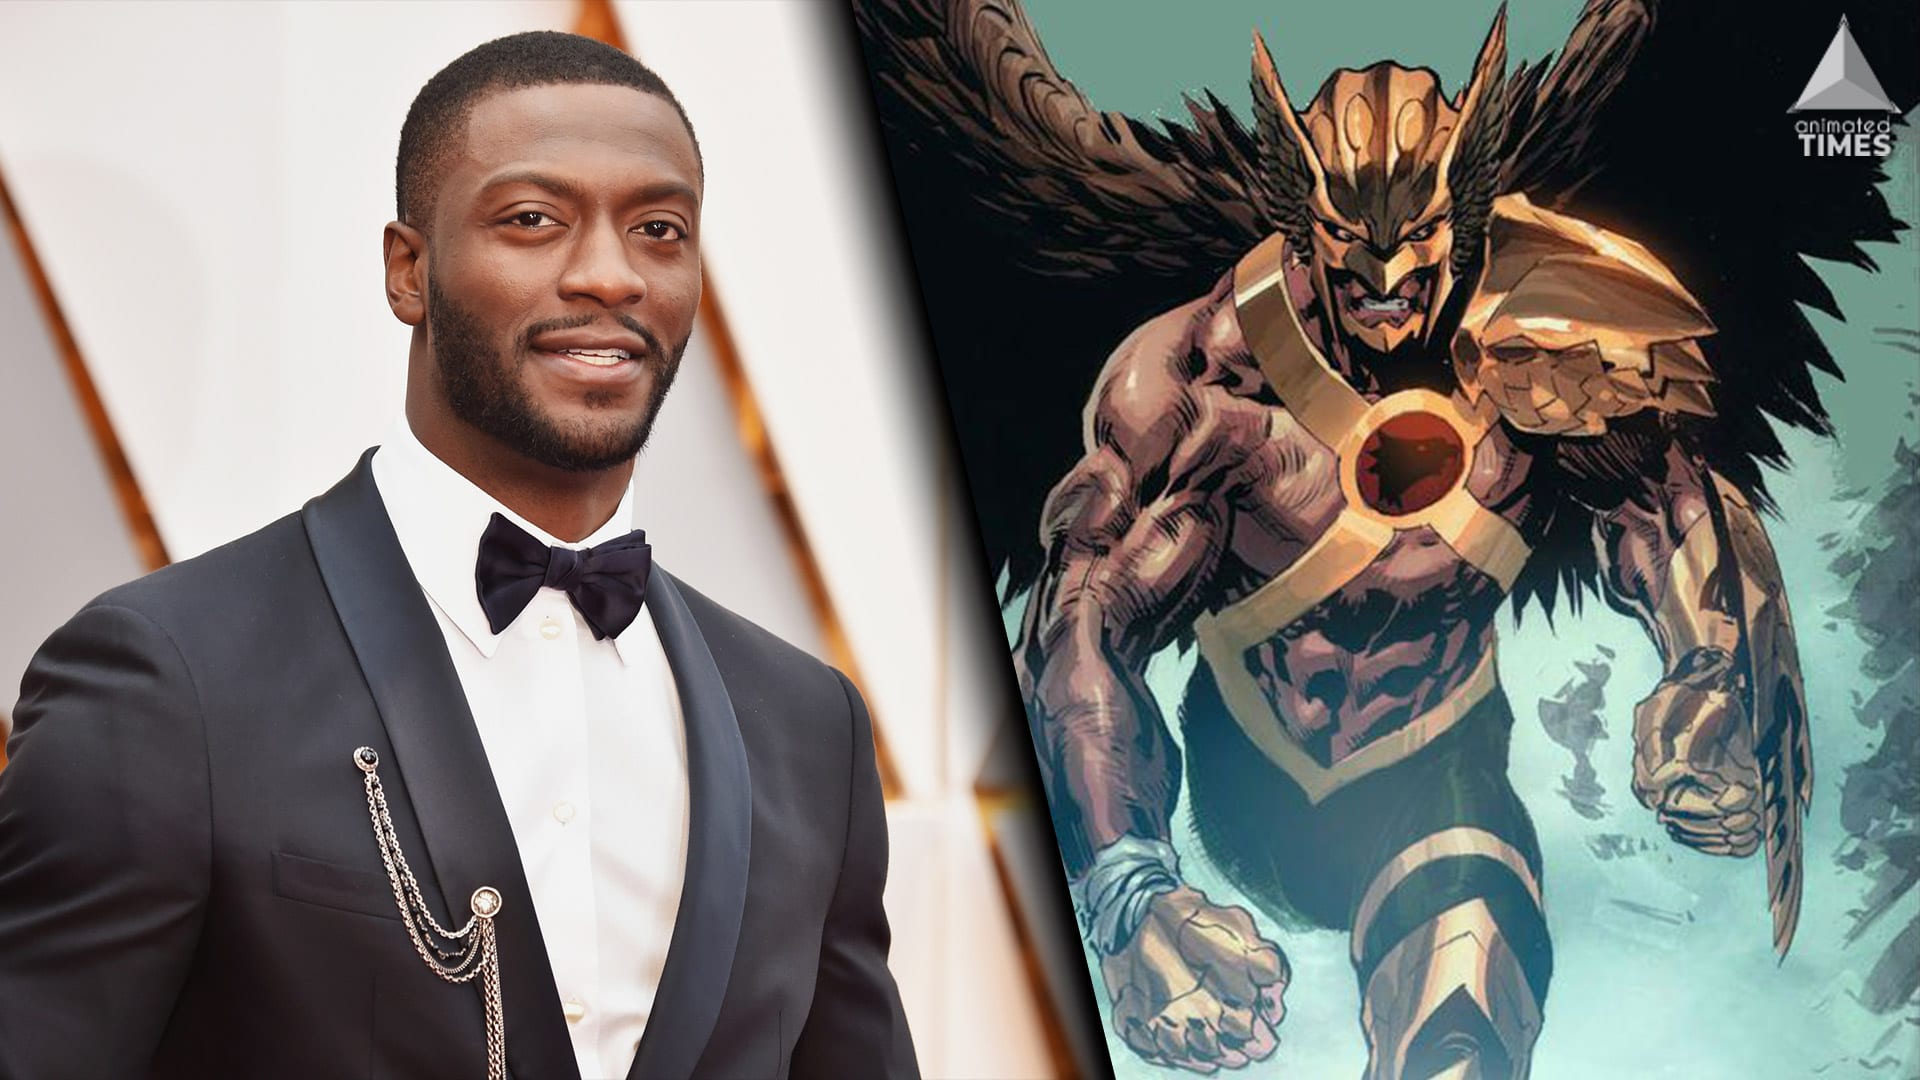 Hawkman is Coming: Aldis Hodge Cast as the Winged Warrior